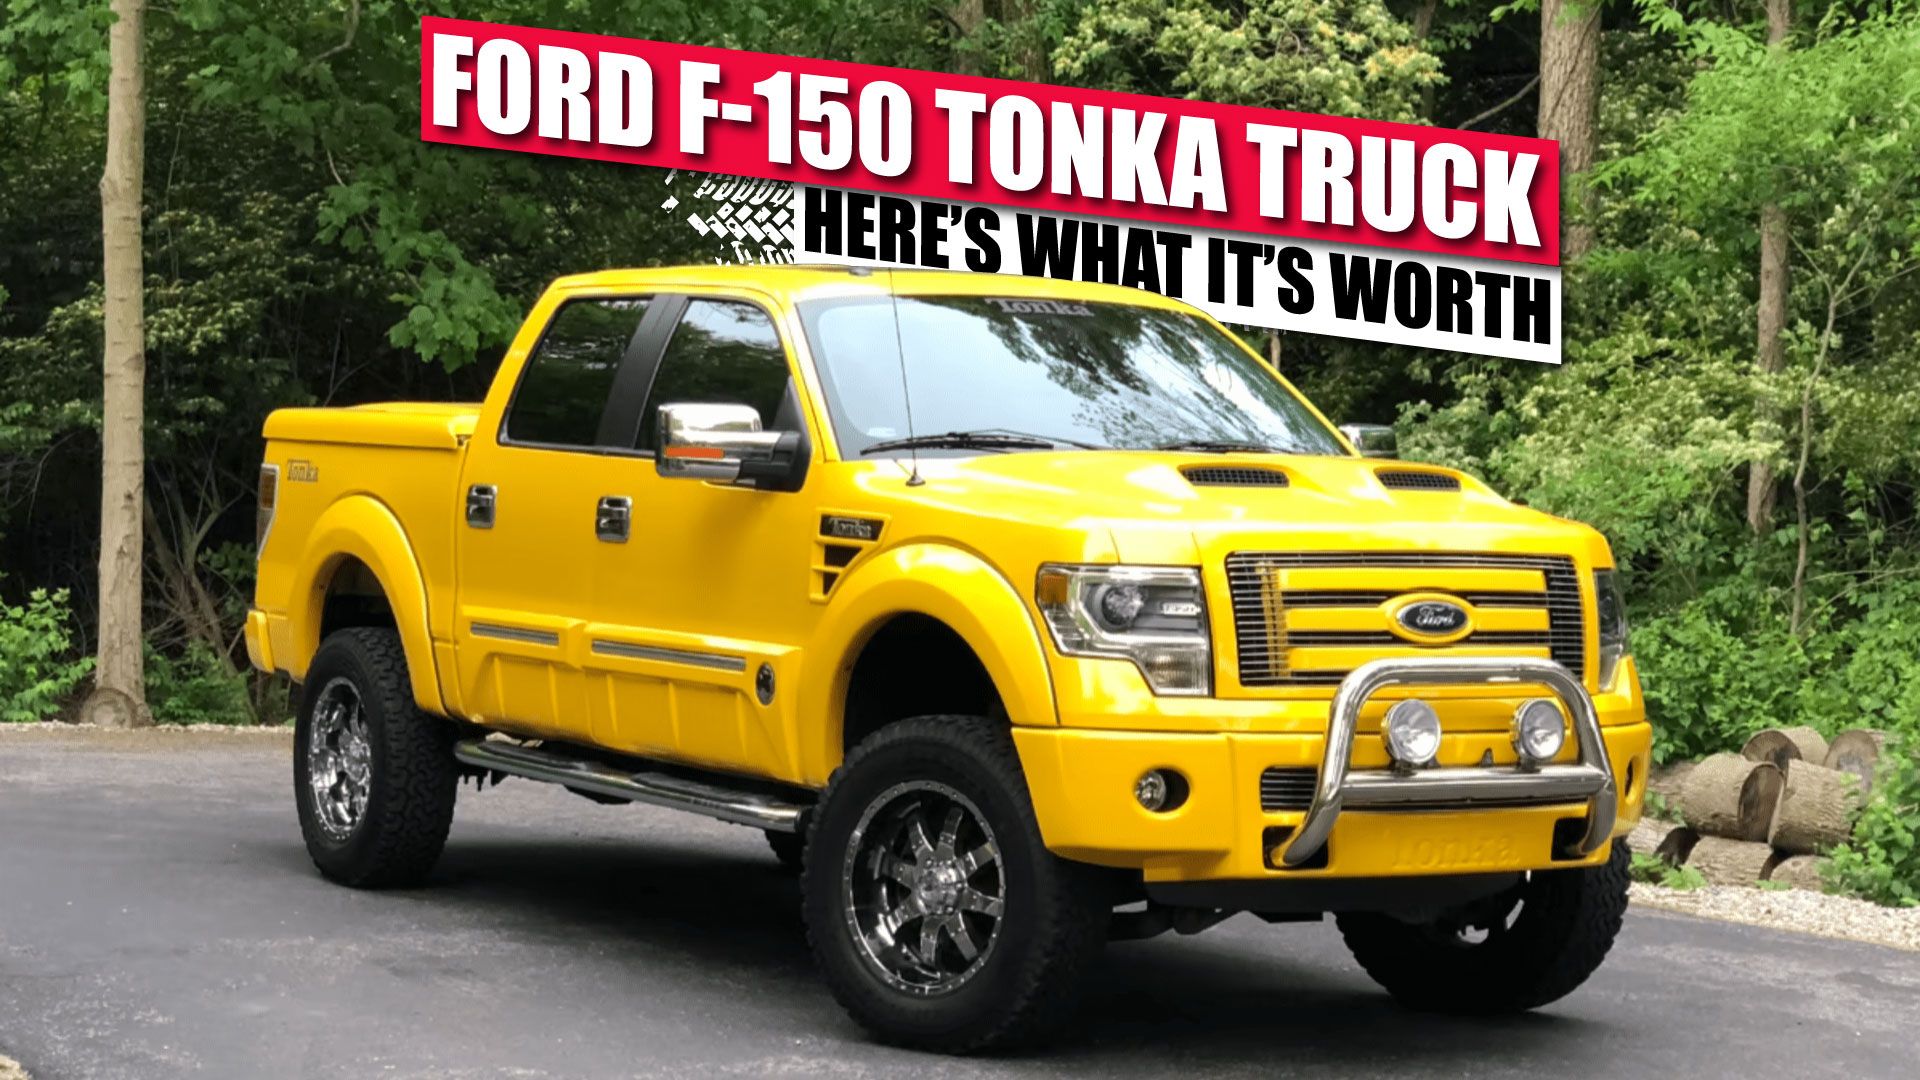 Ford F-150 Tonka Truck Featured Image